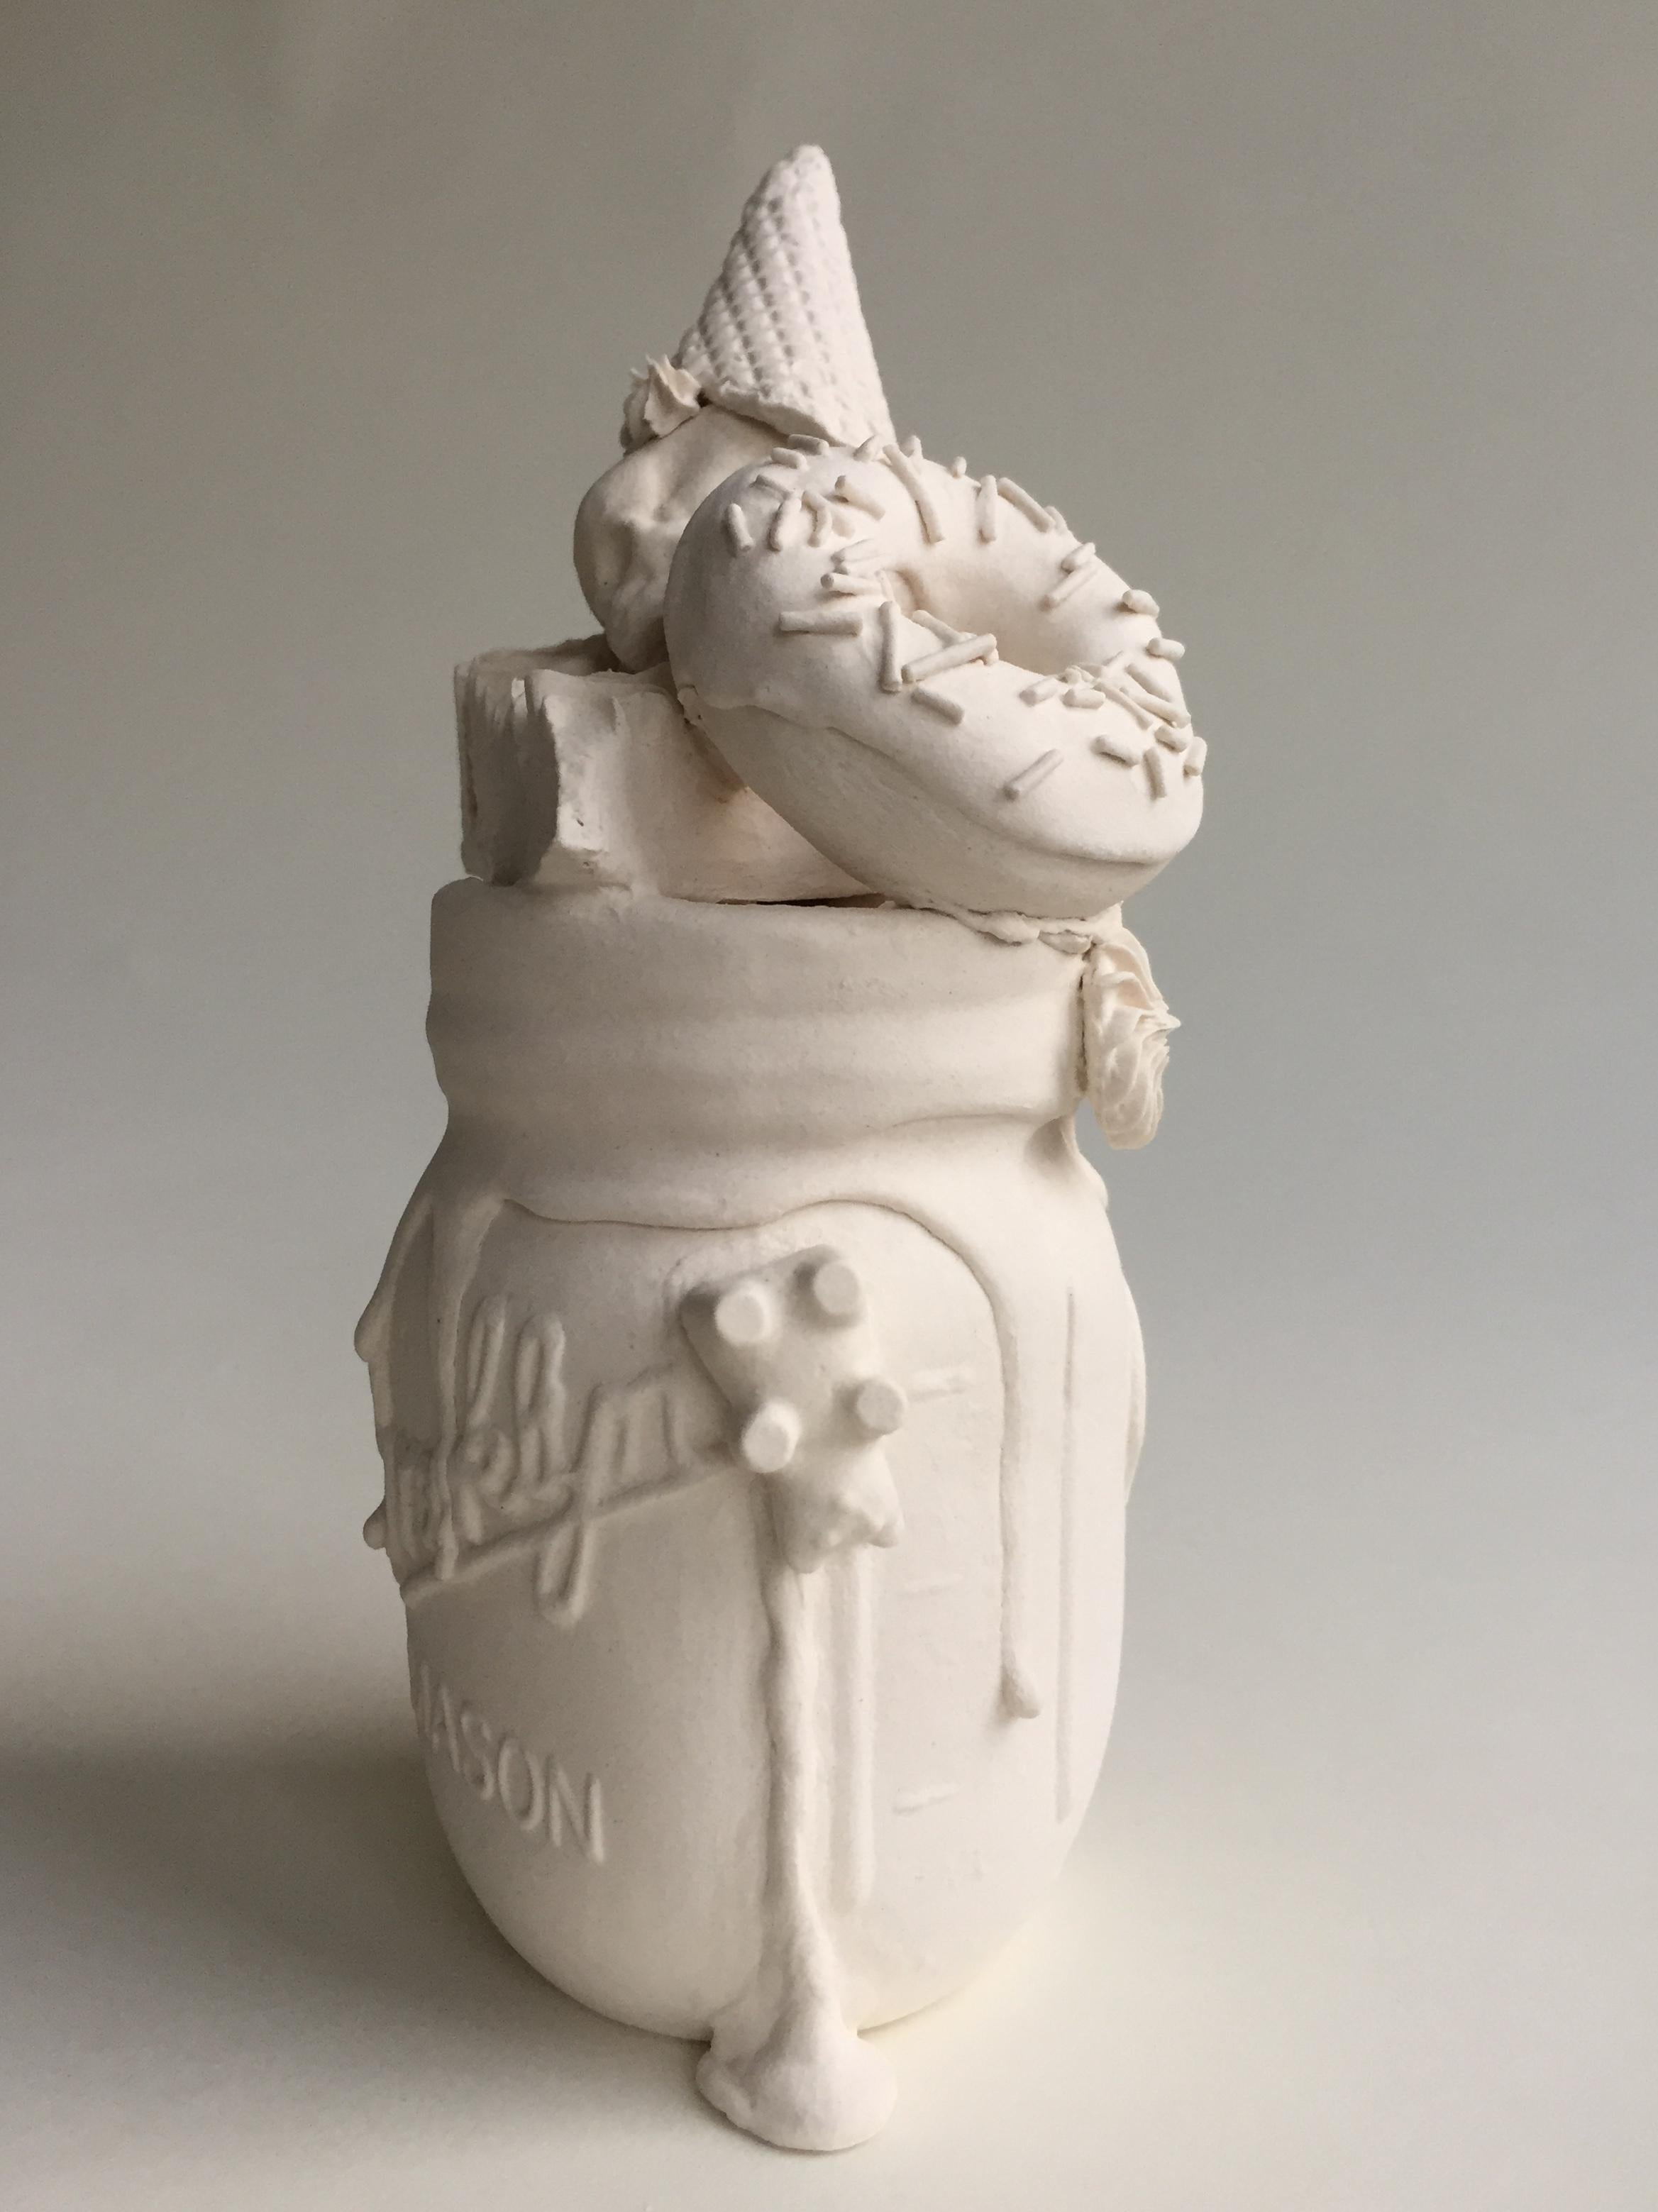 This piece consists of a porcelain slip-casted jar base, intricately topped with slip-casted fetus skulls, donut, and sweets. Decorated with hand piped details and hand rolled sprinkles.  Jacqueline Tse channels her love-hate relationship with sugar